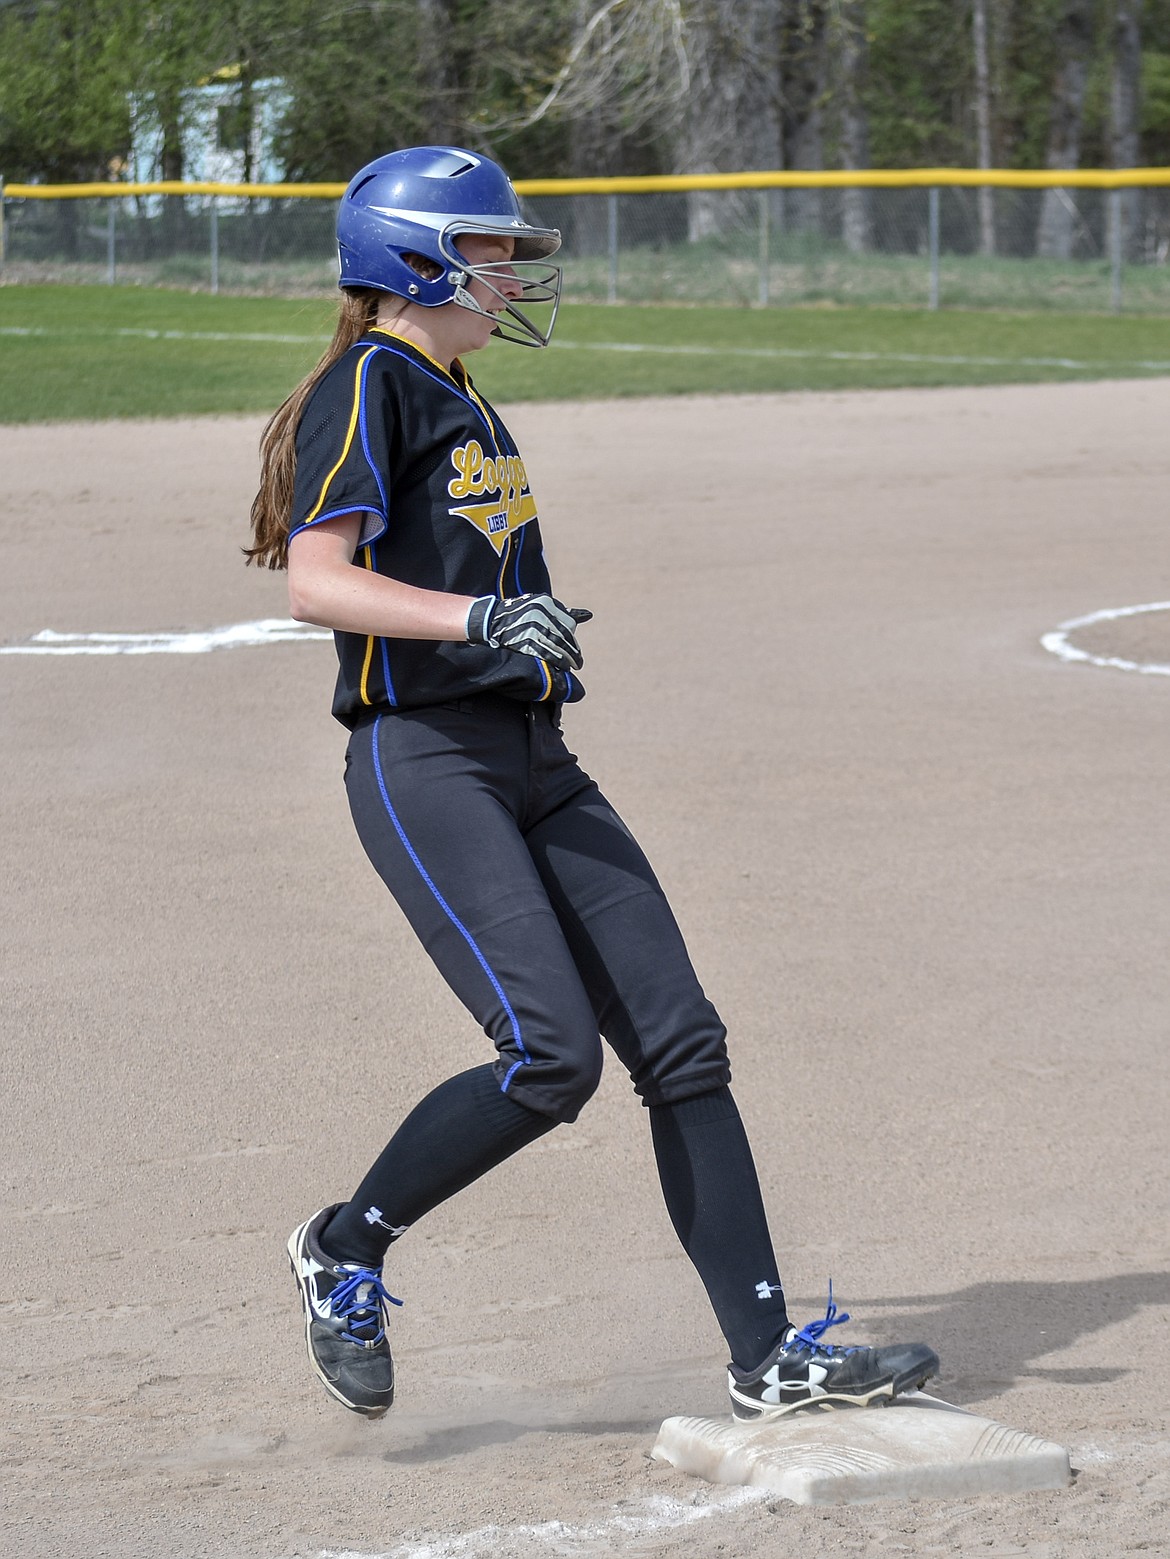 Libby junior Samantha Miller hit a triple that batted in two runners during the first inning of Libby&#146;s 17-0 win against Browning Saturday.